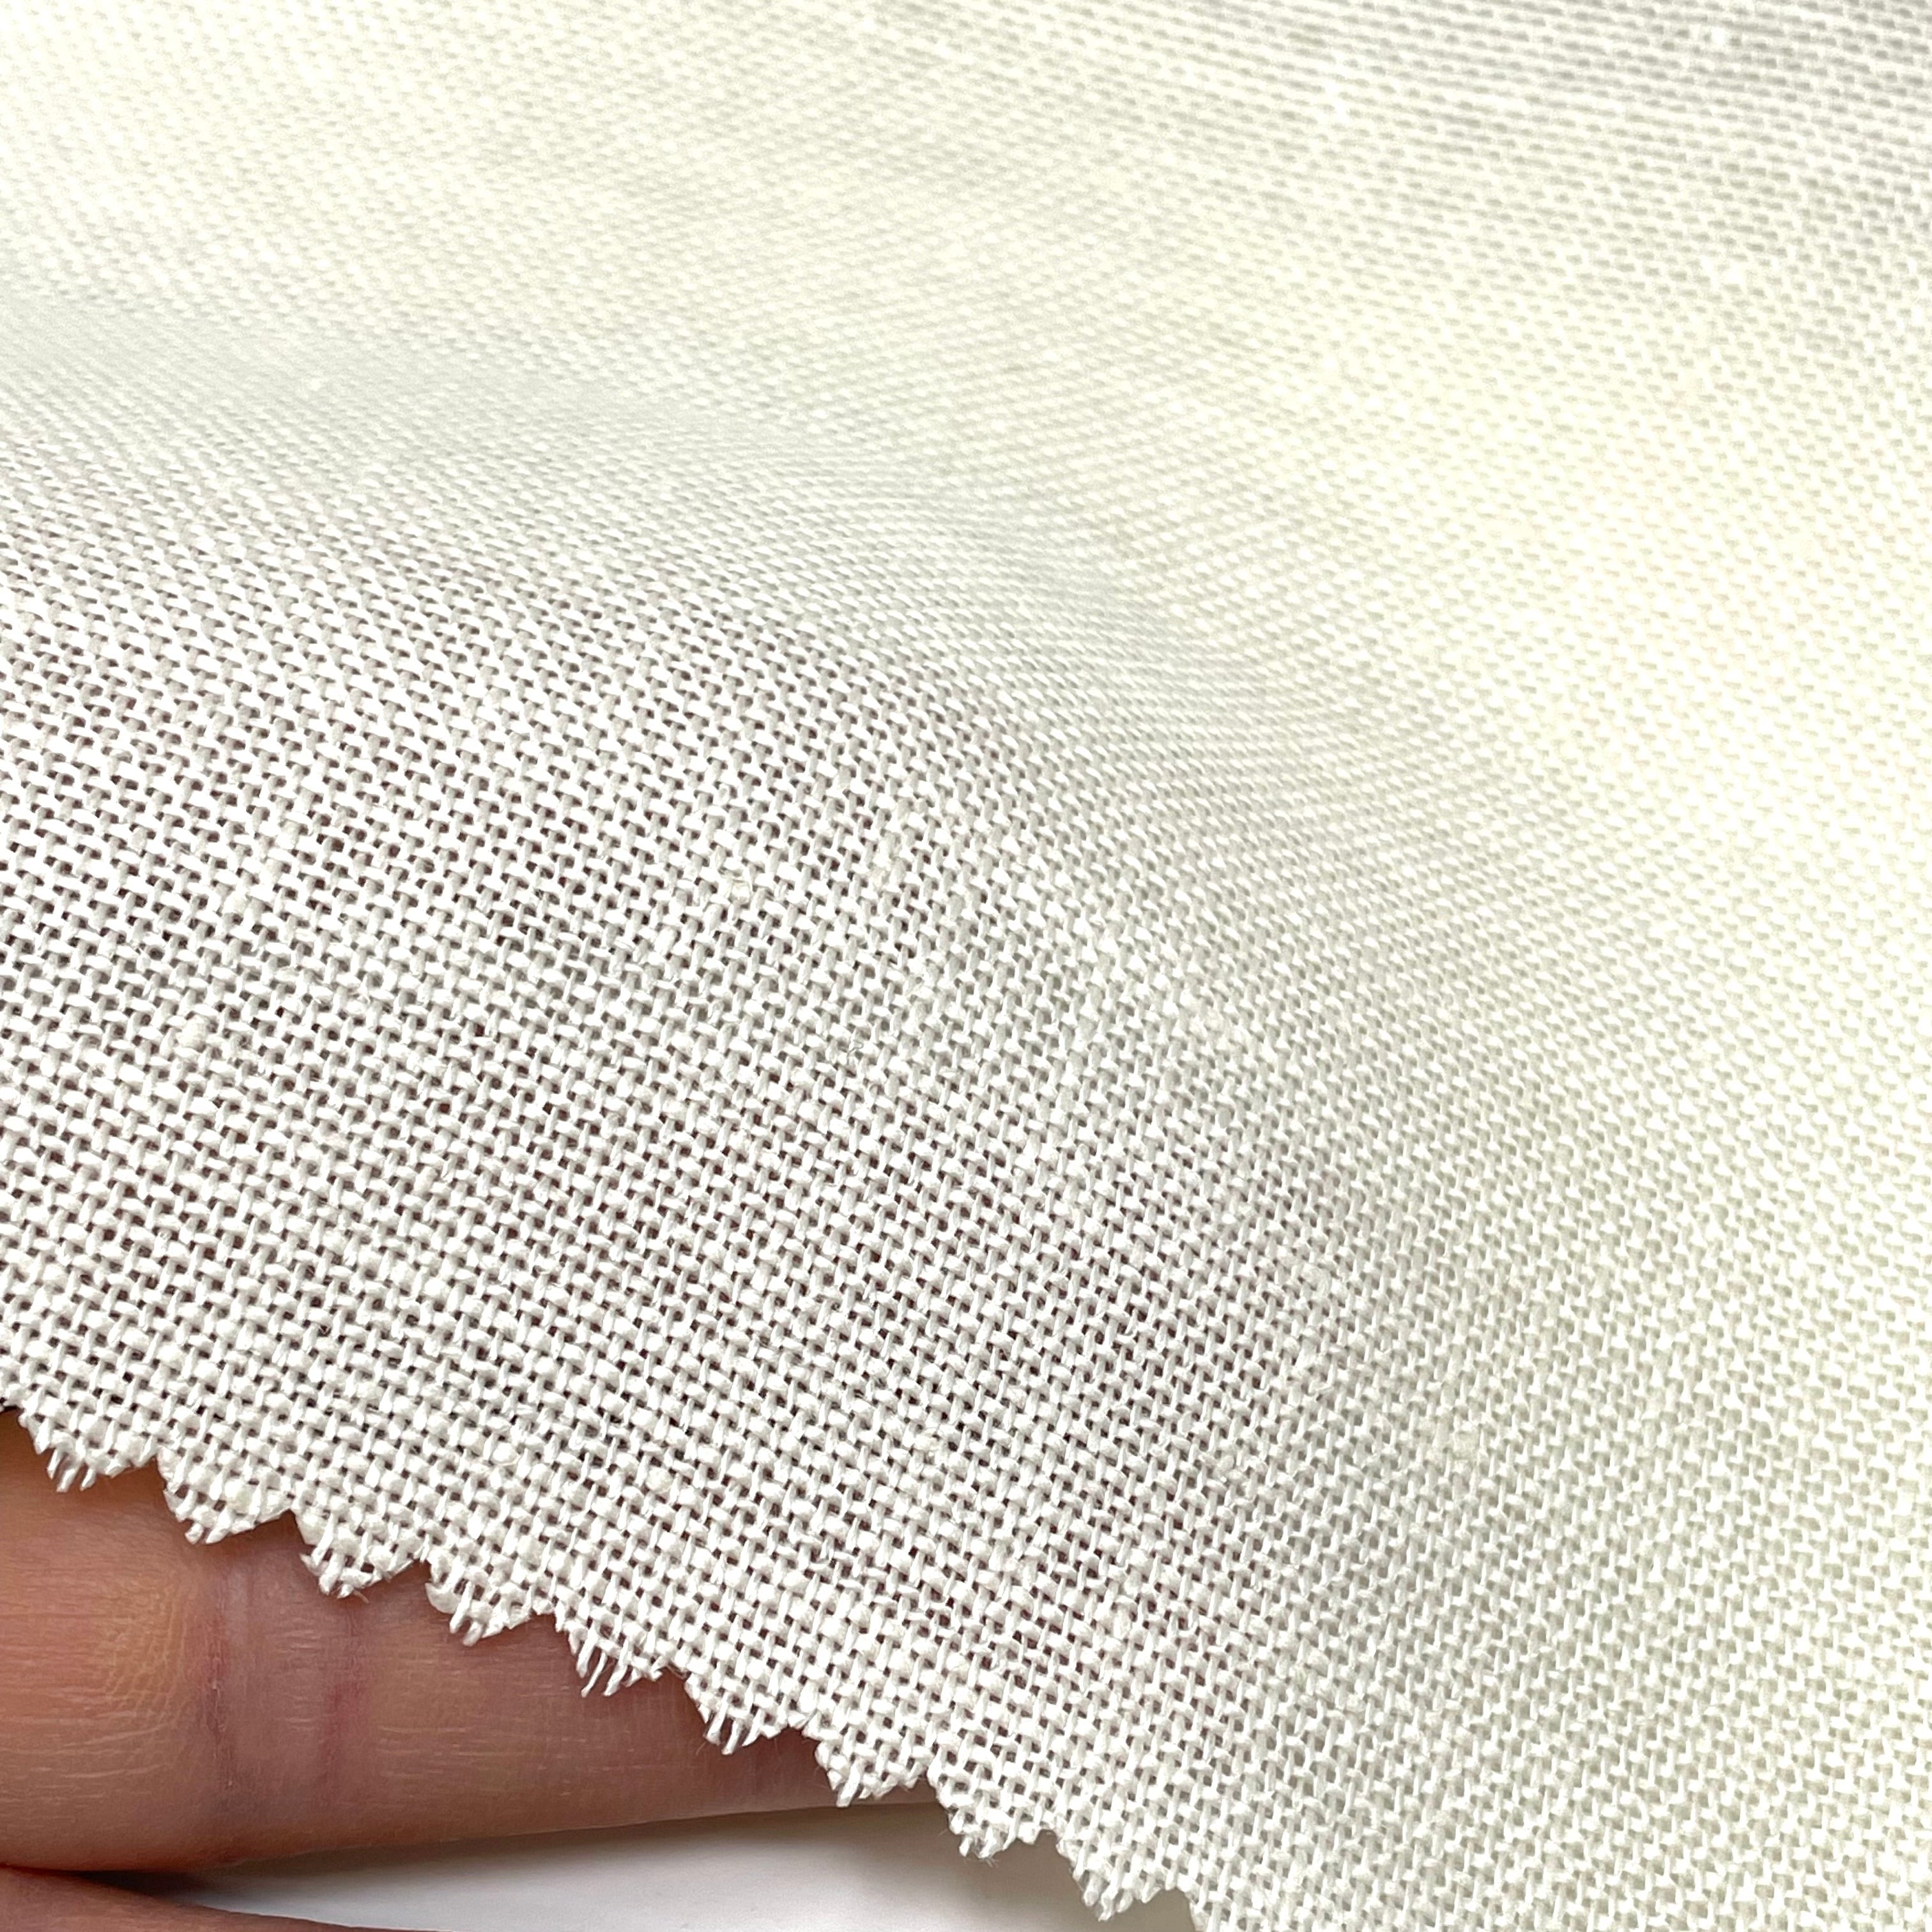 Textured 100% Natural Sheer Linen Fabric By The Yard, Curtain, Drapery, Table Top, 57" Width/CL1075